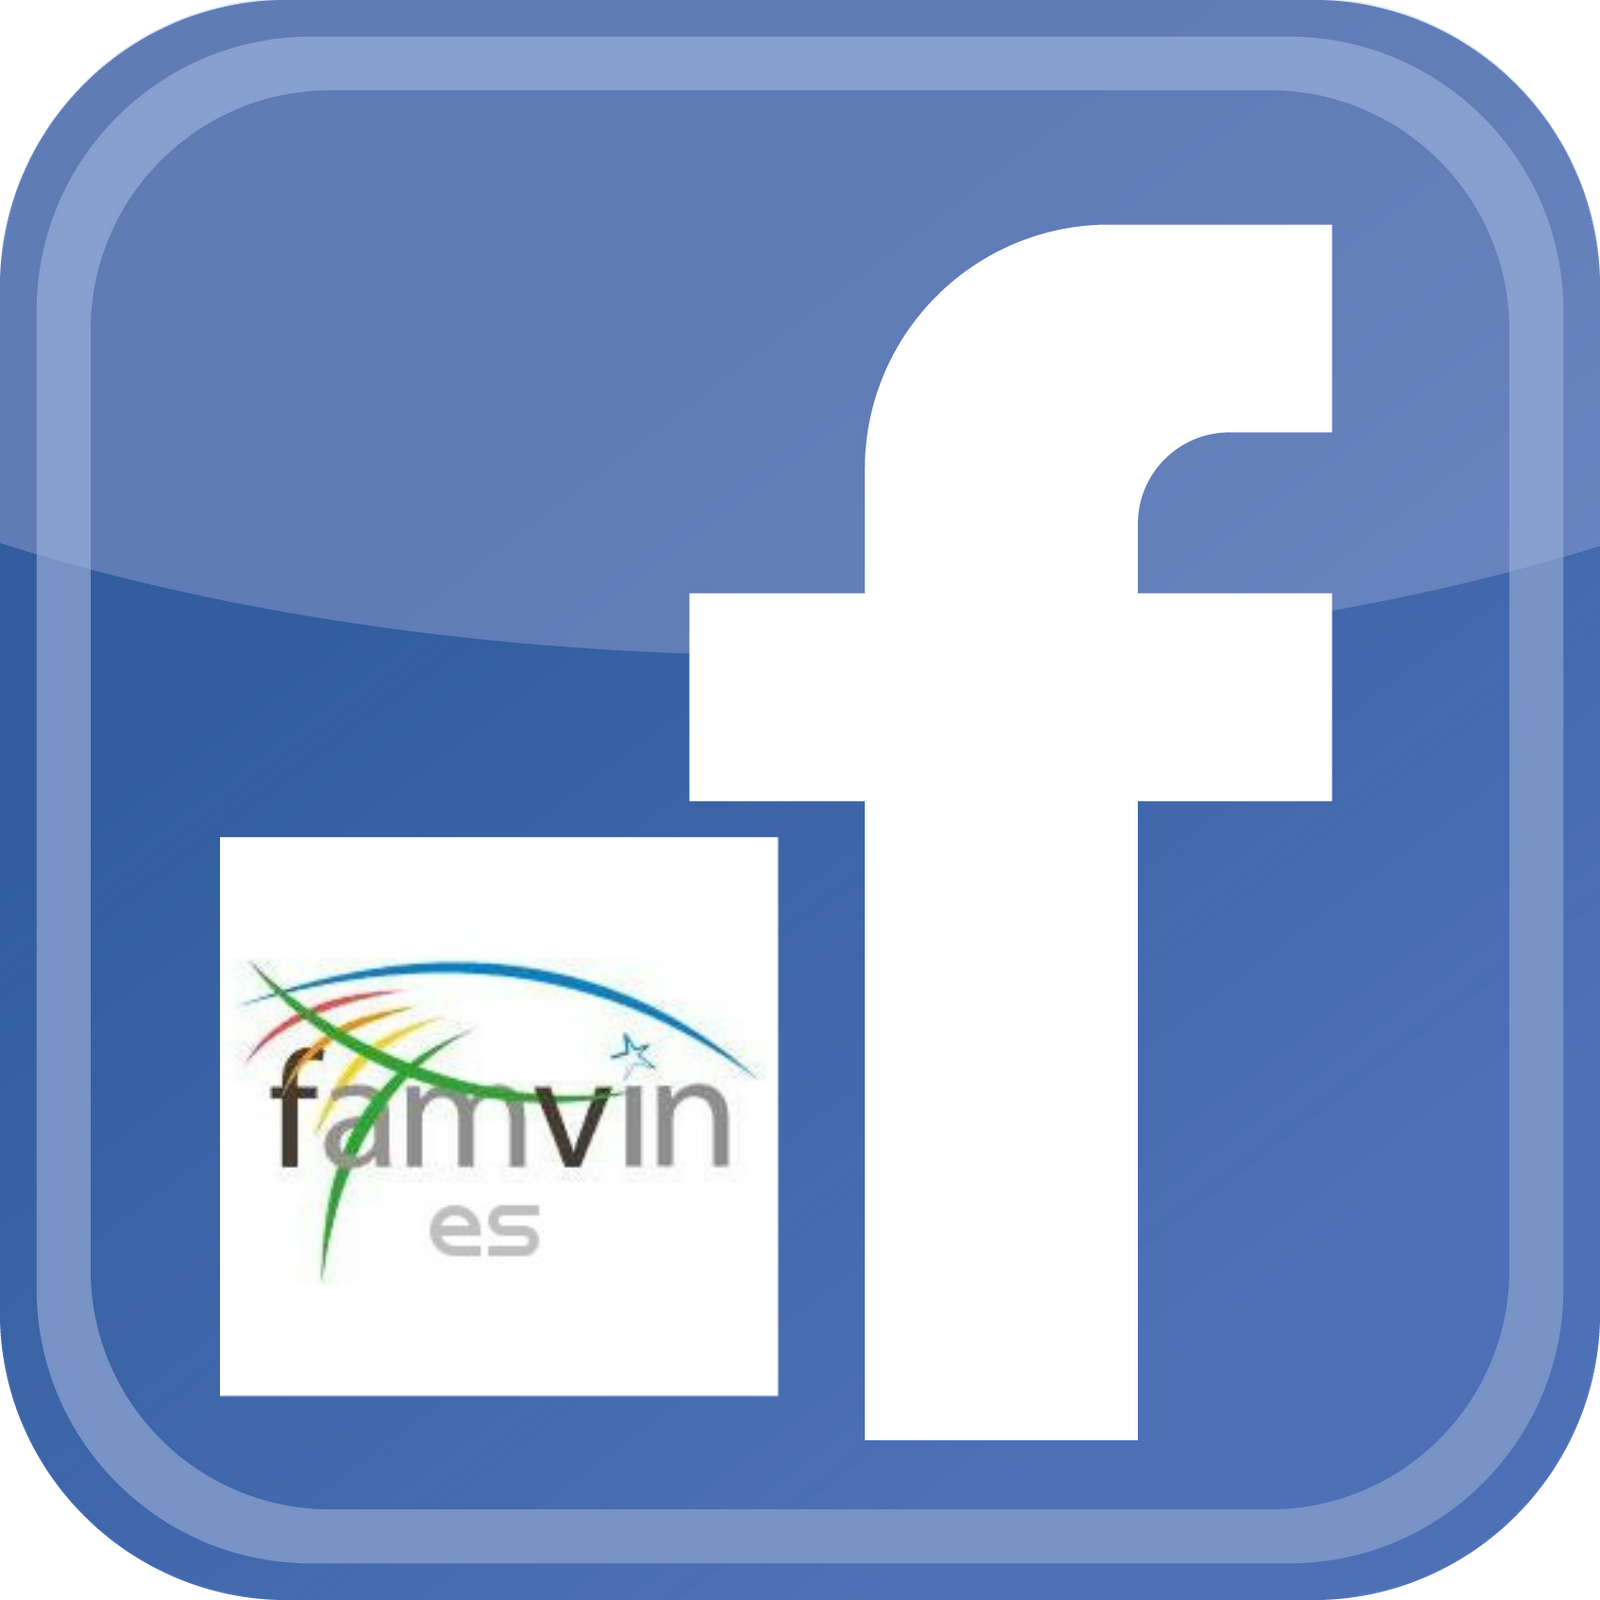 FamVin Facebook in Spanish Launches!